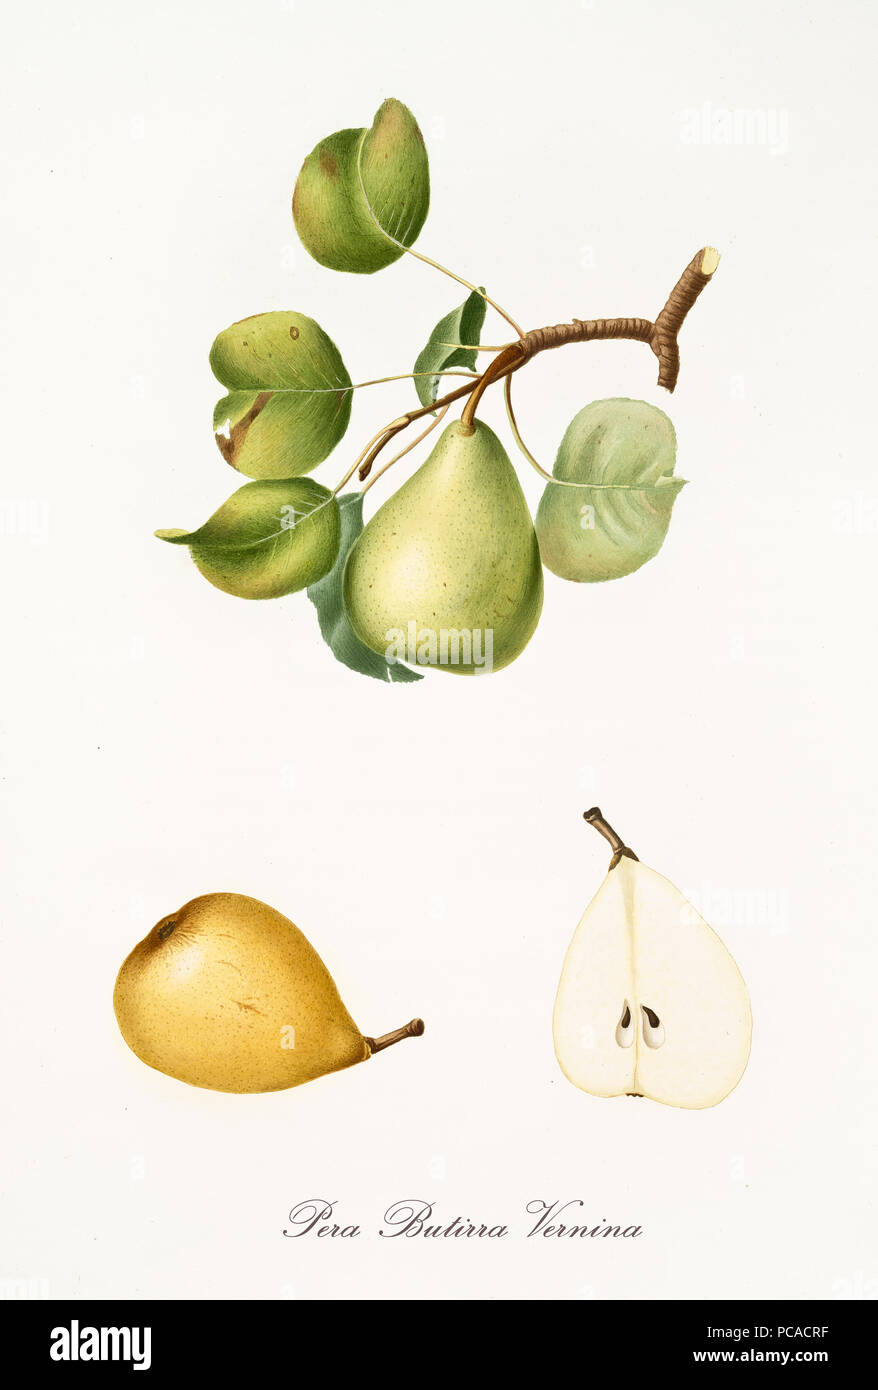 Pear, Butirra Vernina pear, on a single branch with leaves and single section on white background. Old botanical illustration realized with a detailed watercolor by Giorgio Gallesio on 1817, 1839 Stock Photo